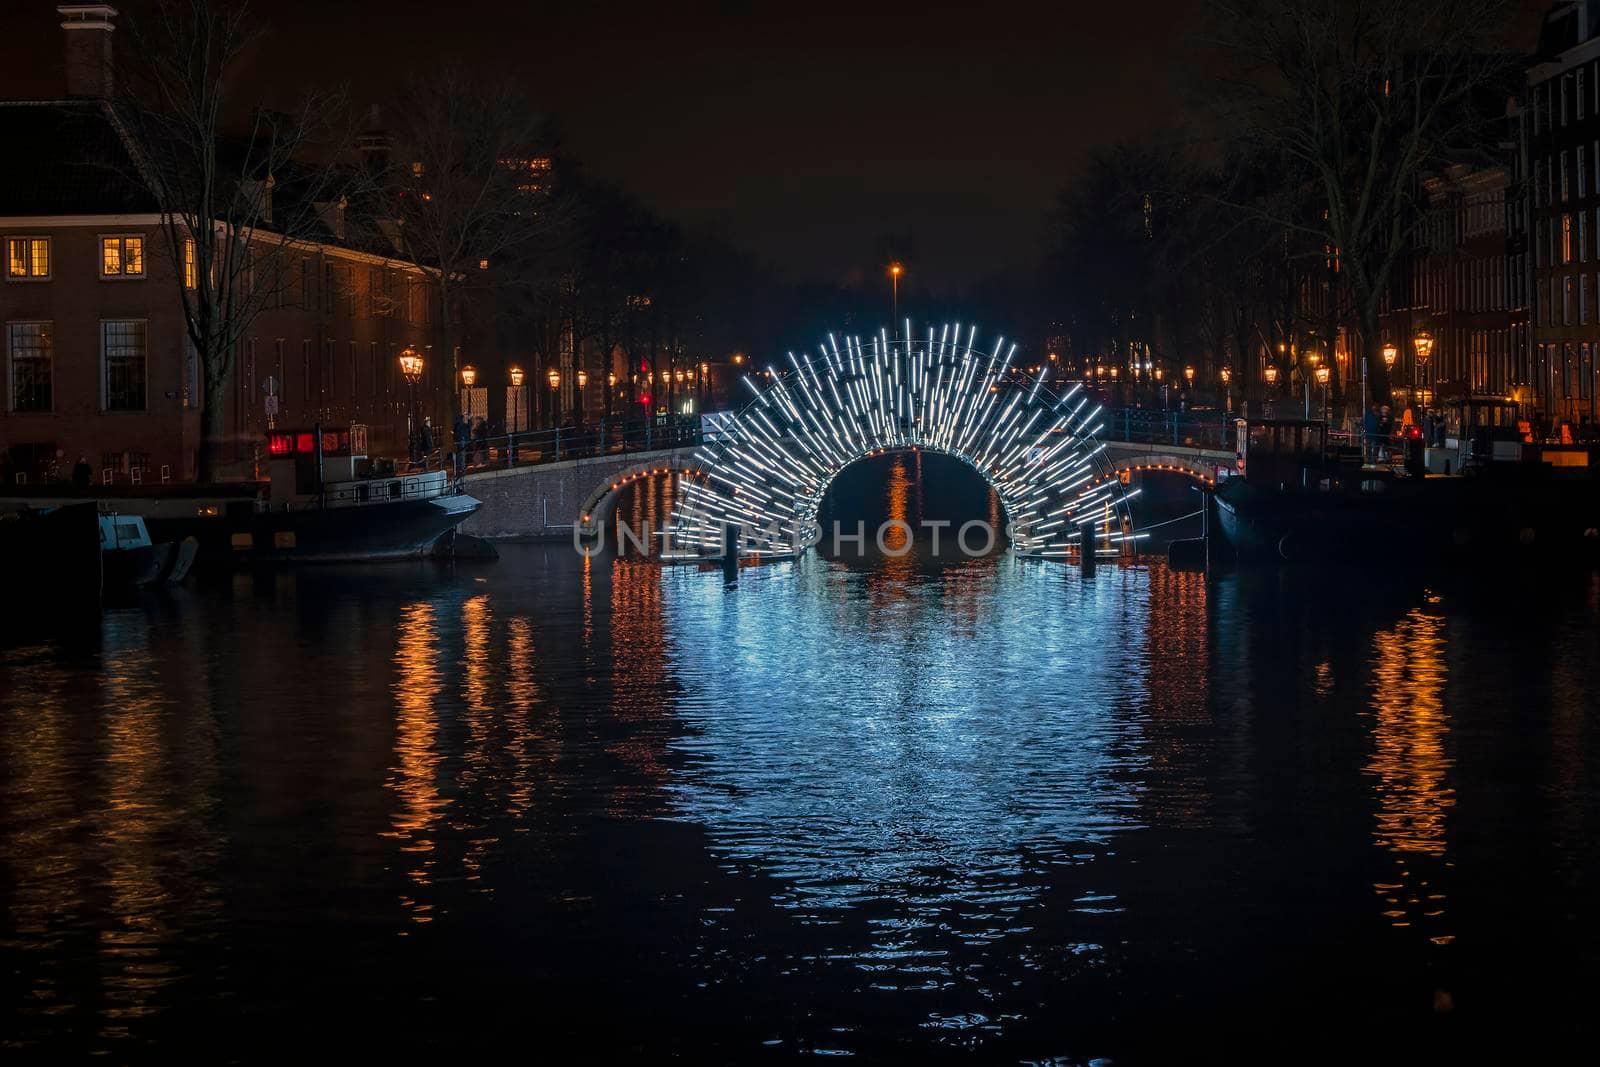 Illuminated bridge in Amsterdam at the Amstel in the Netherlands at night by devy